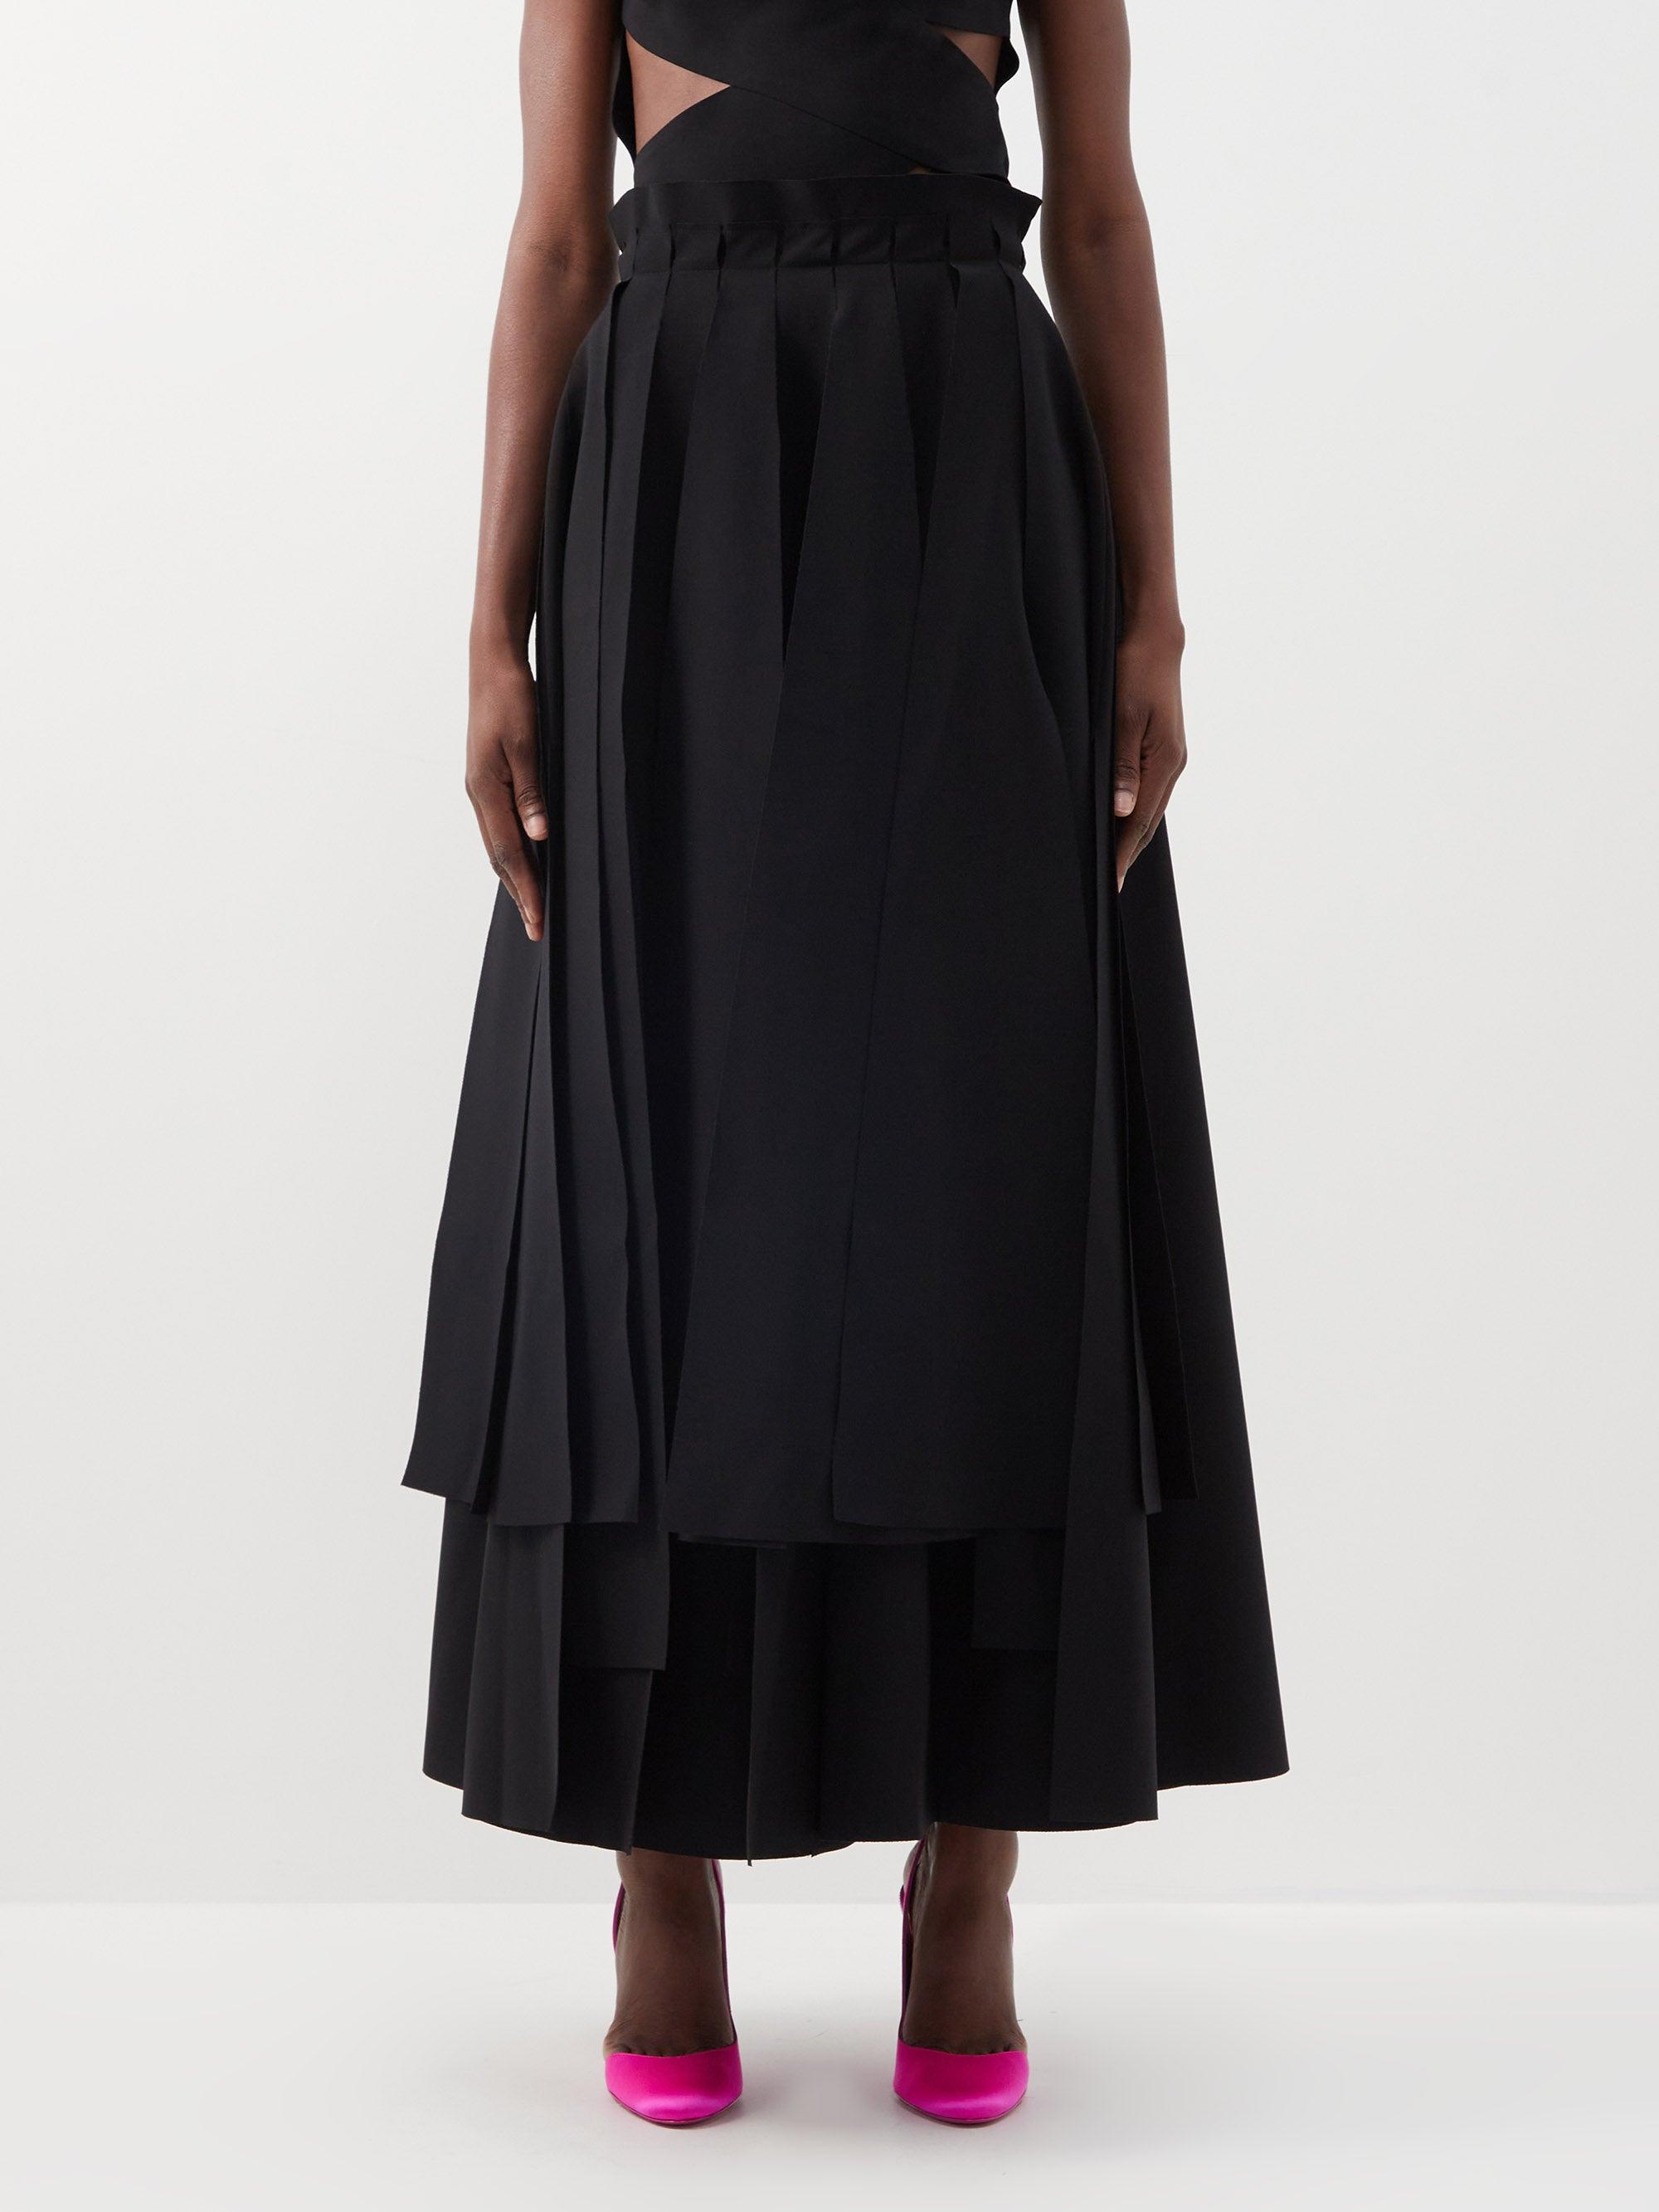 A.W.A.K.E. MODE Knife-pleated Tiered Crepe Maxi Skirt in Black | Lyst